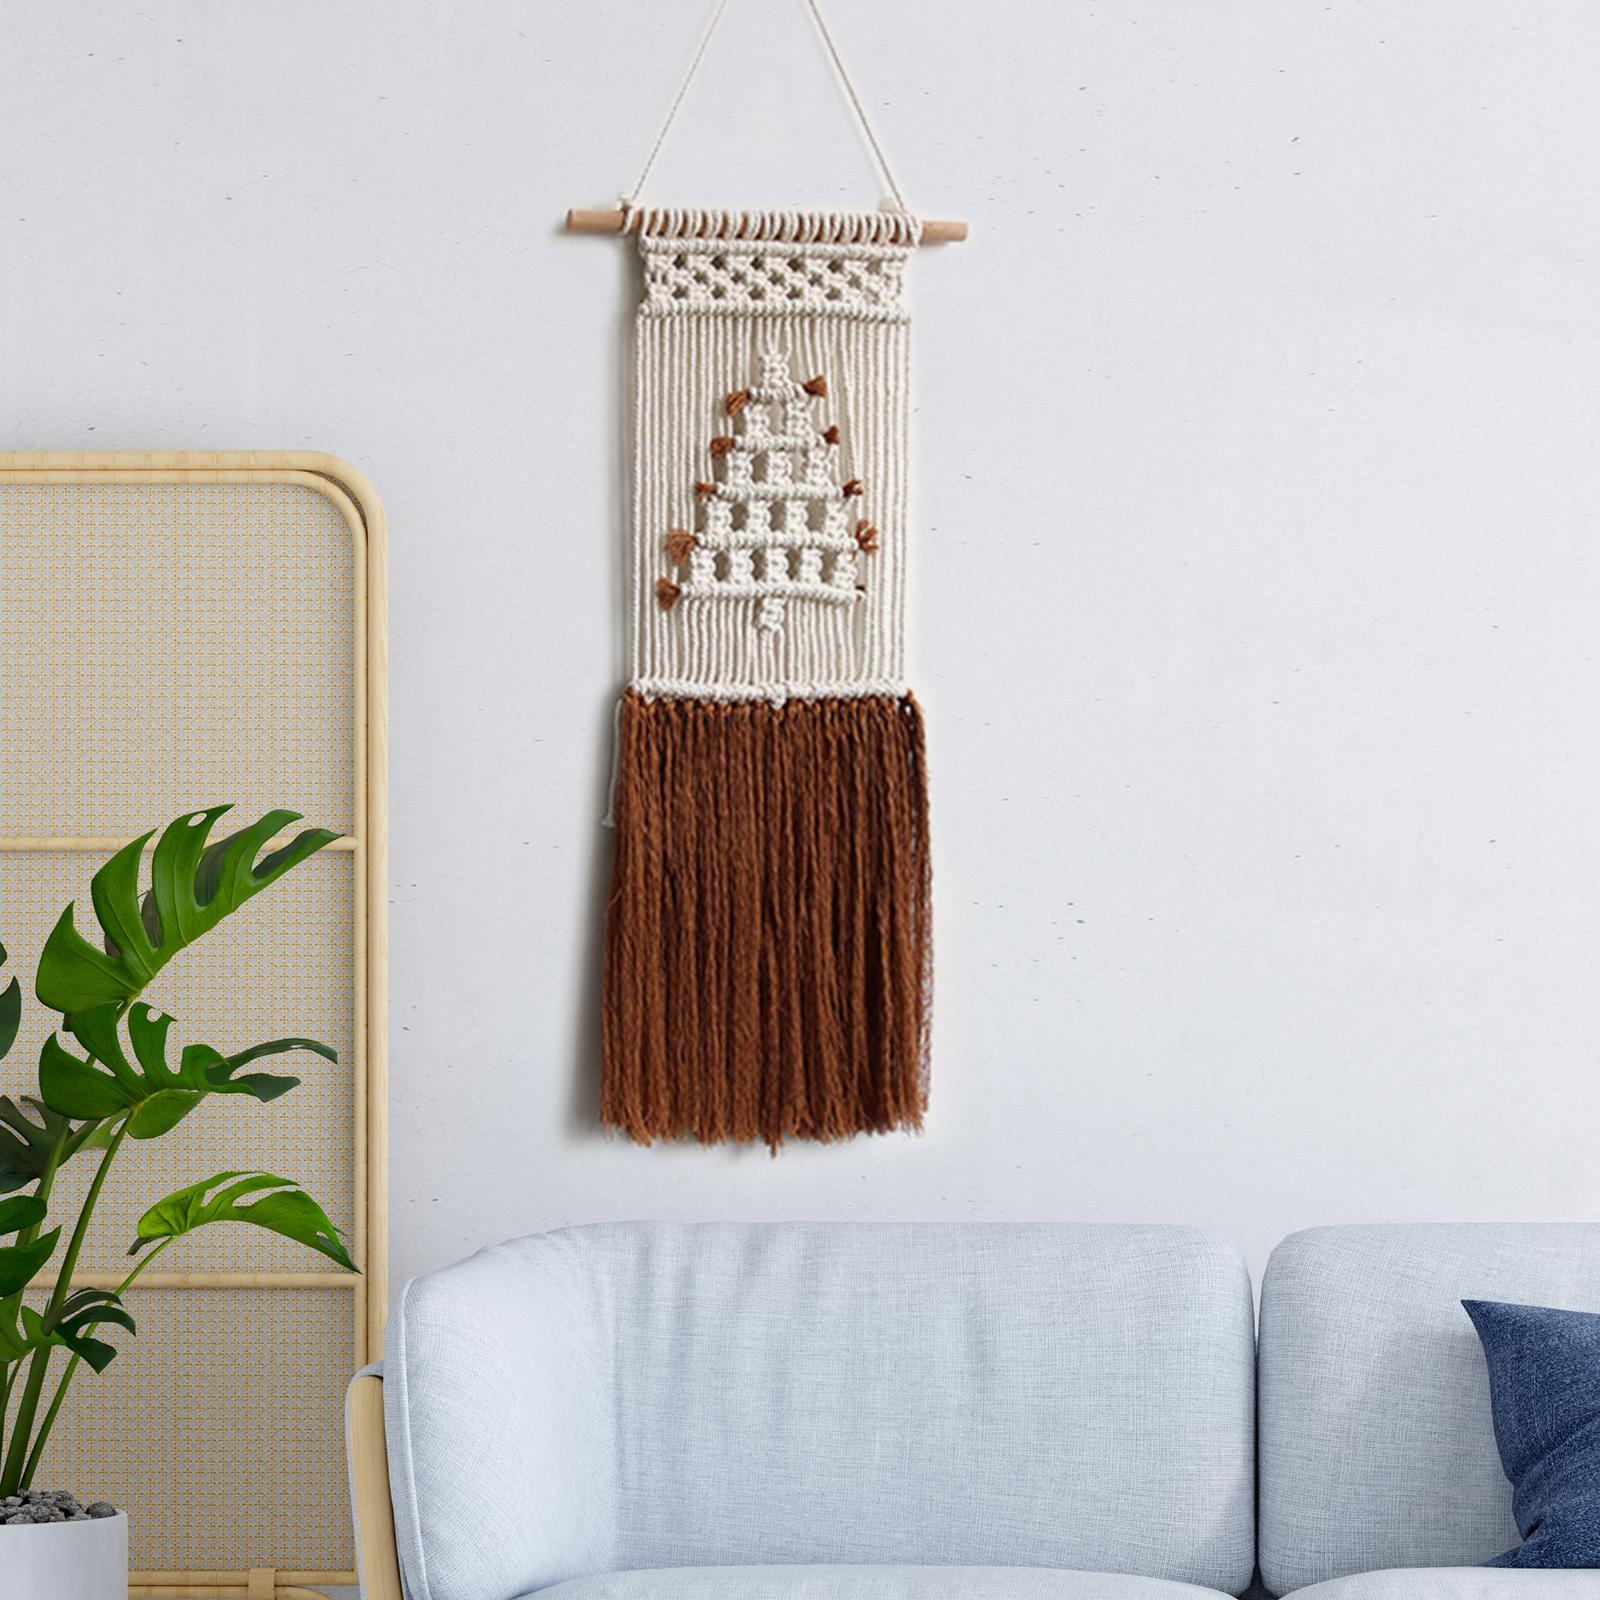 Macrame Wall Hanging Bohemian Chic Hand Woven Tapestry for Apartment Gallery 30cmx65cm